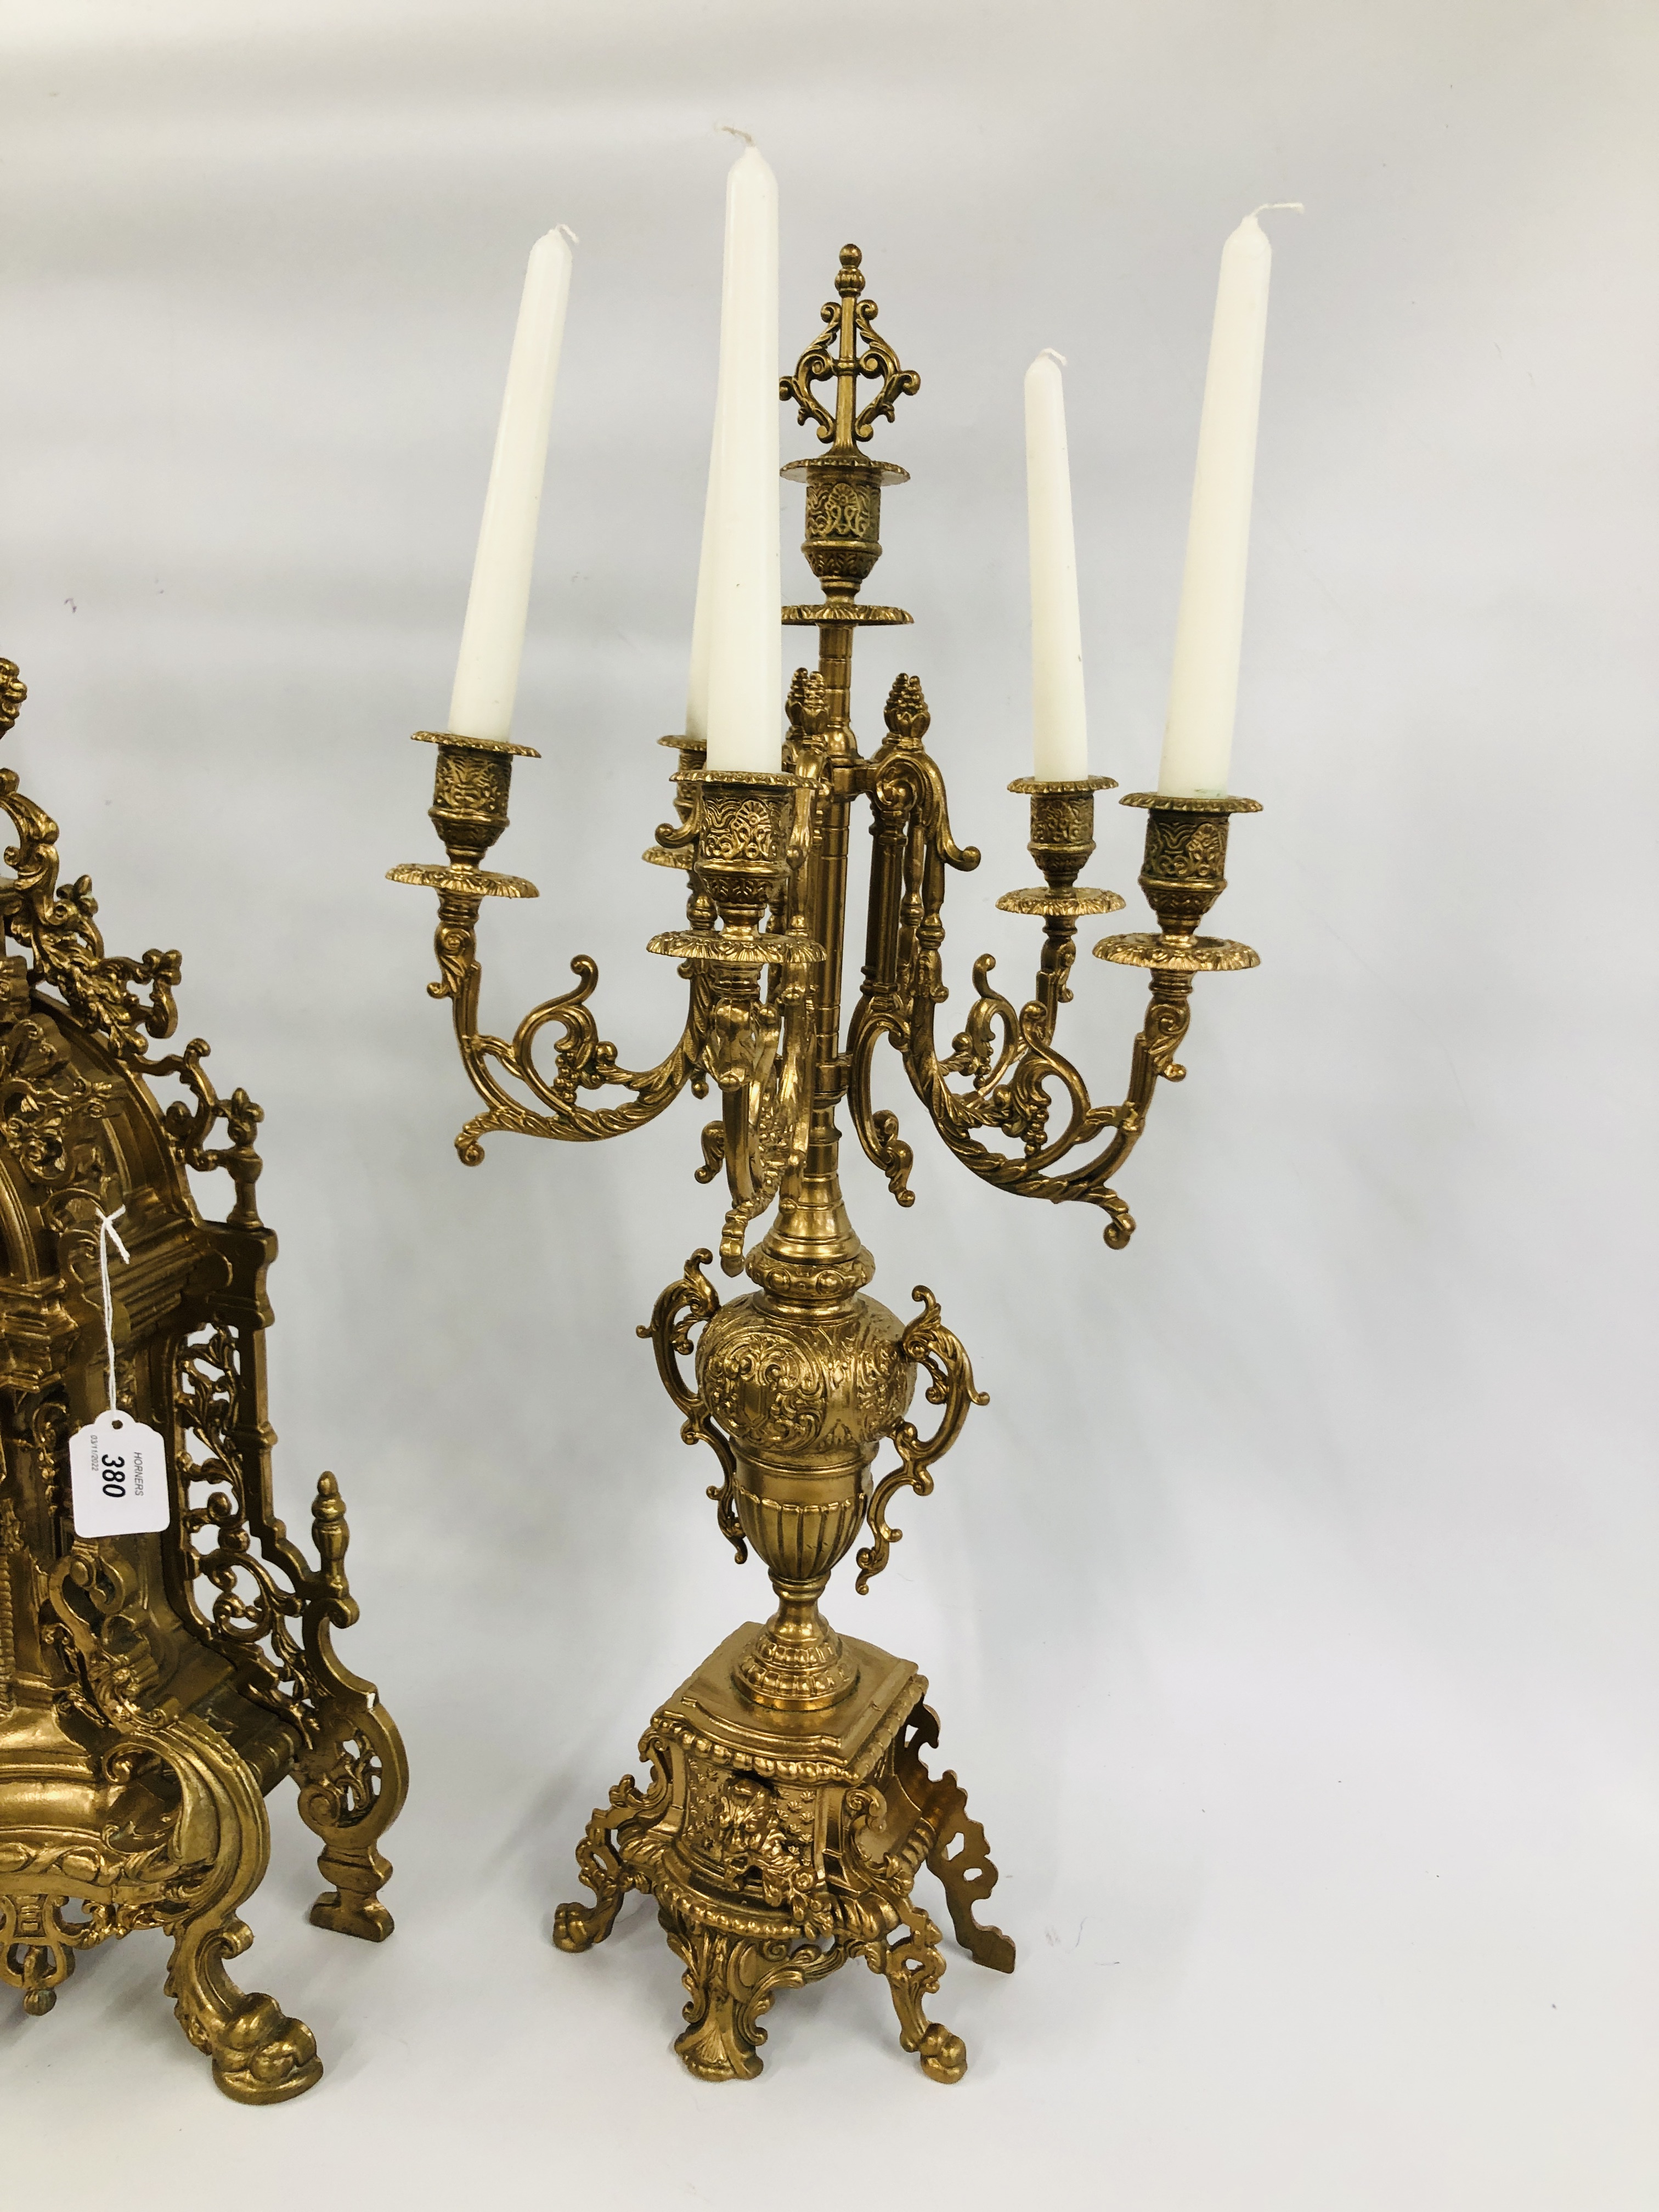 AN IMPRESSIVE CONTINENTAL ORNATE GILT METAL MANTEL TIME PIECE AND PAIR OF SIX POT CANDELABRA - Image 2 of 7